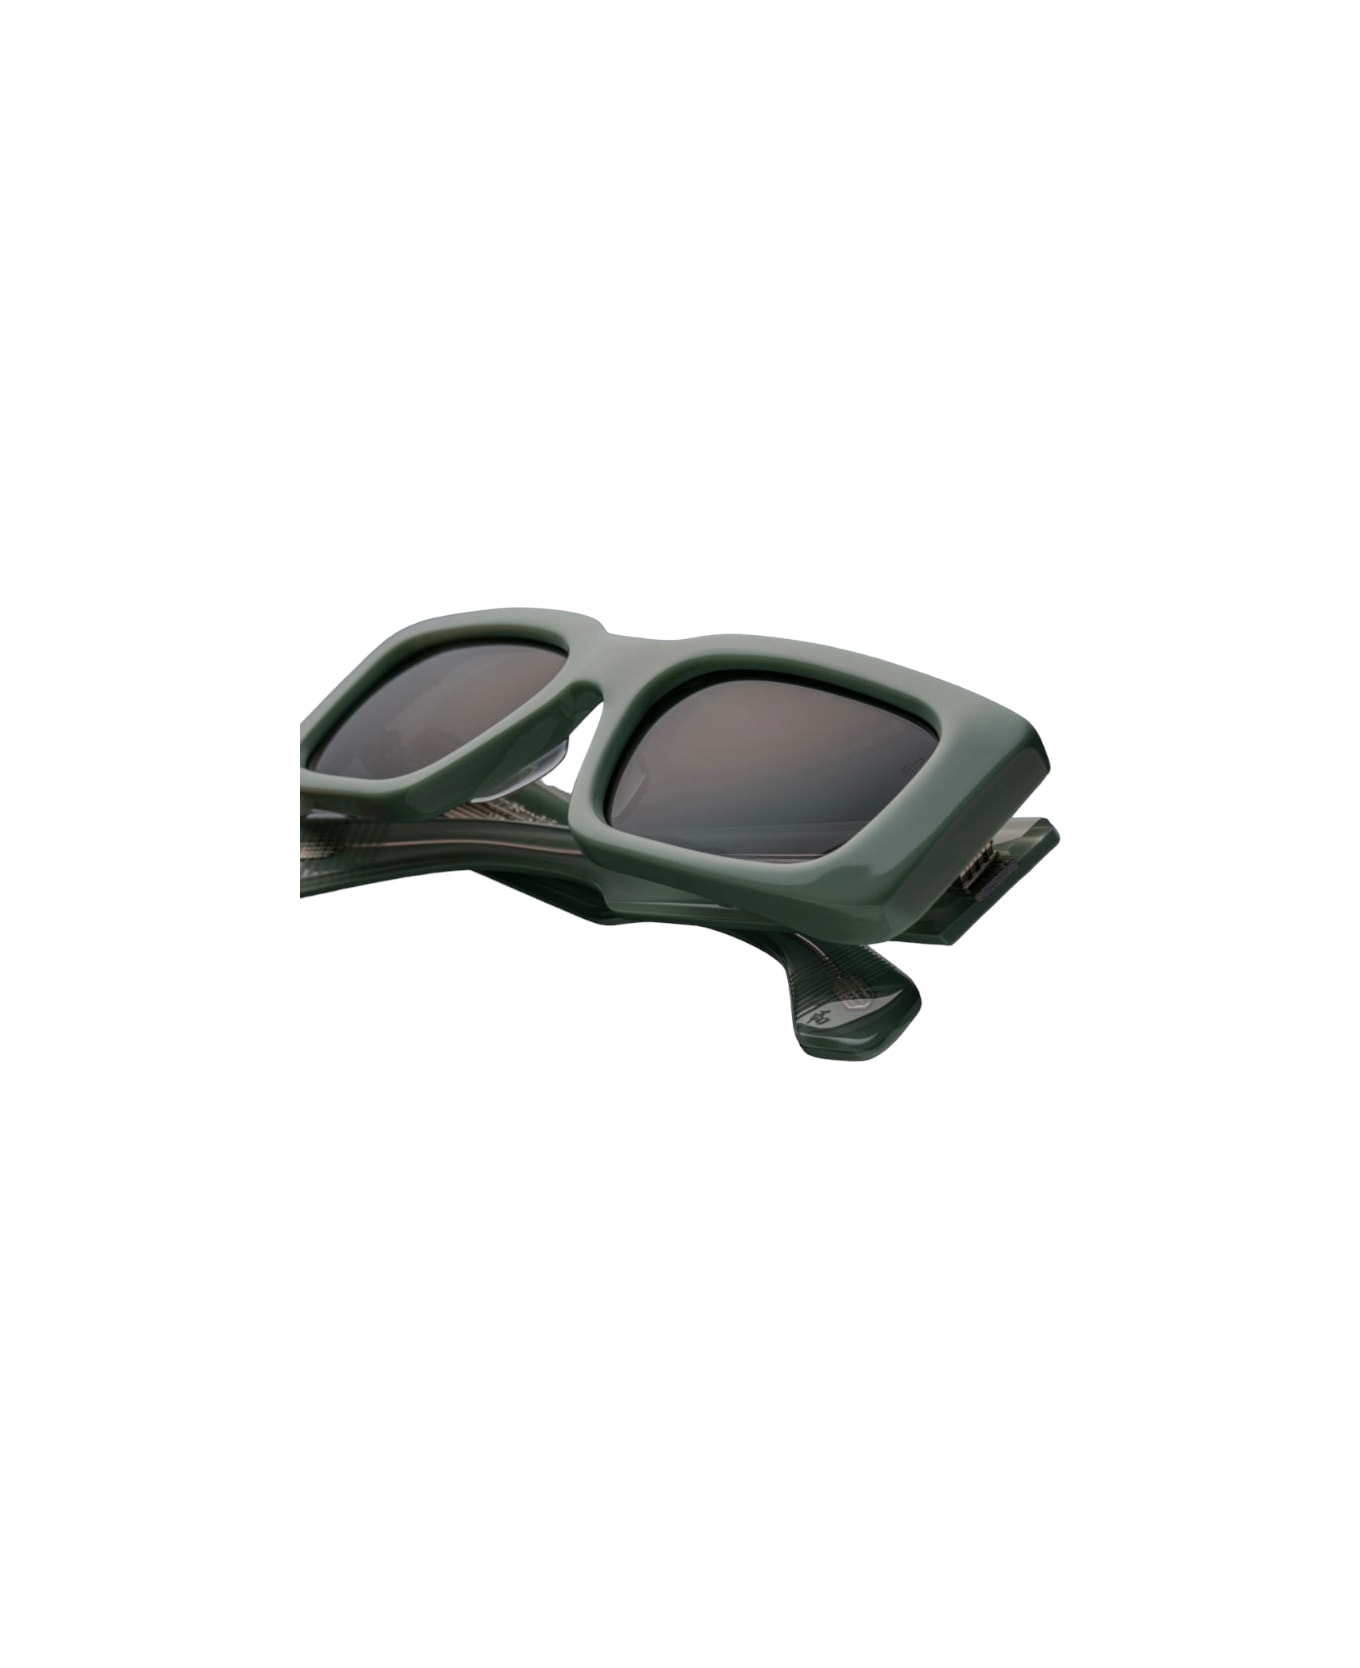 Jacques Marie Mage Supersonic - Glassier Sunglasses